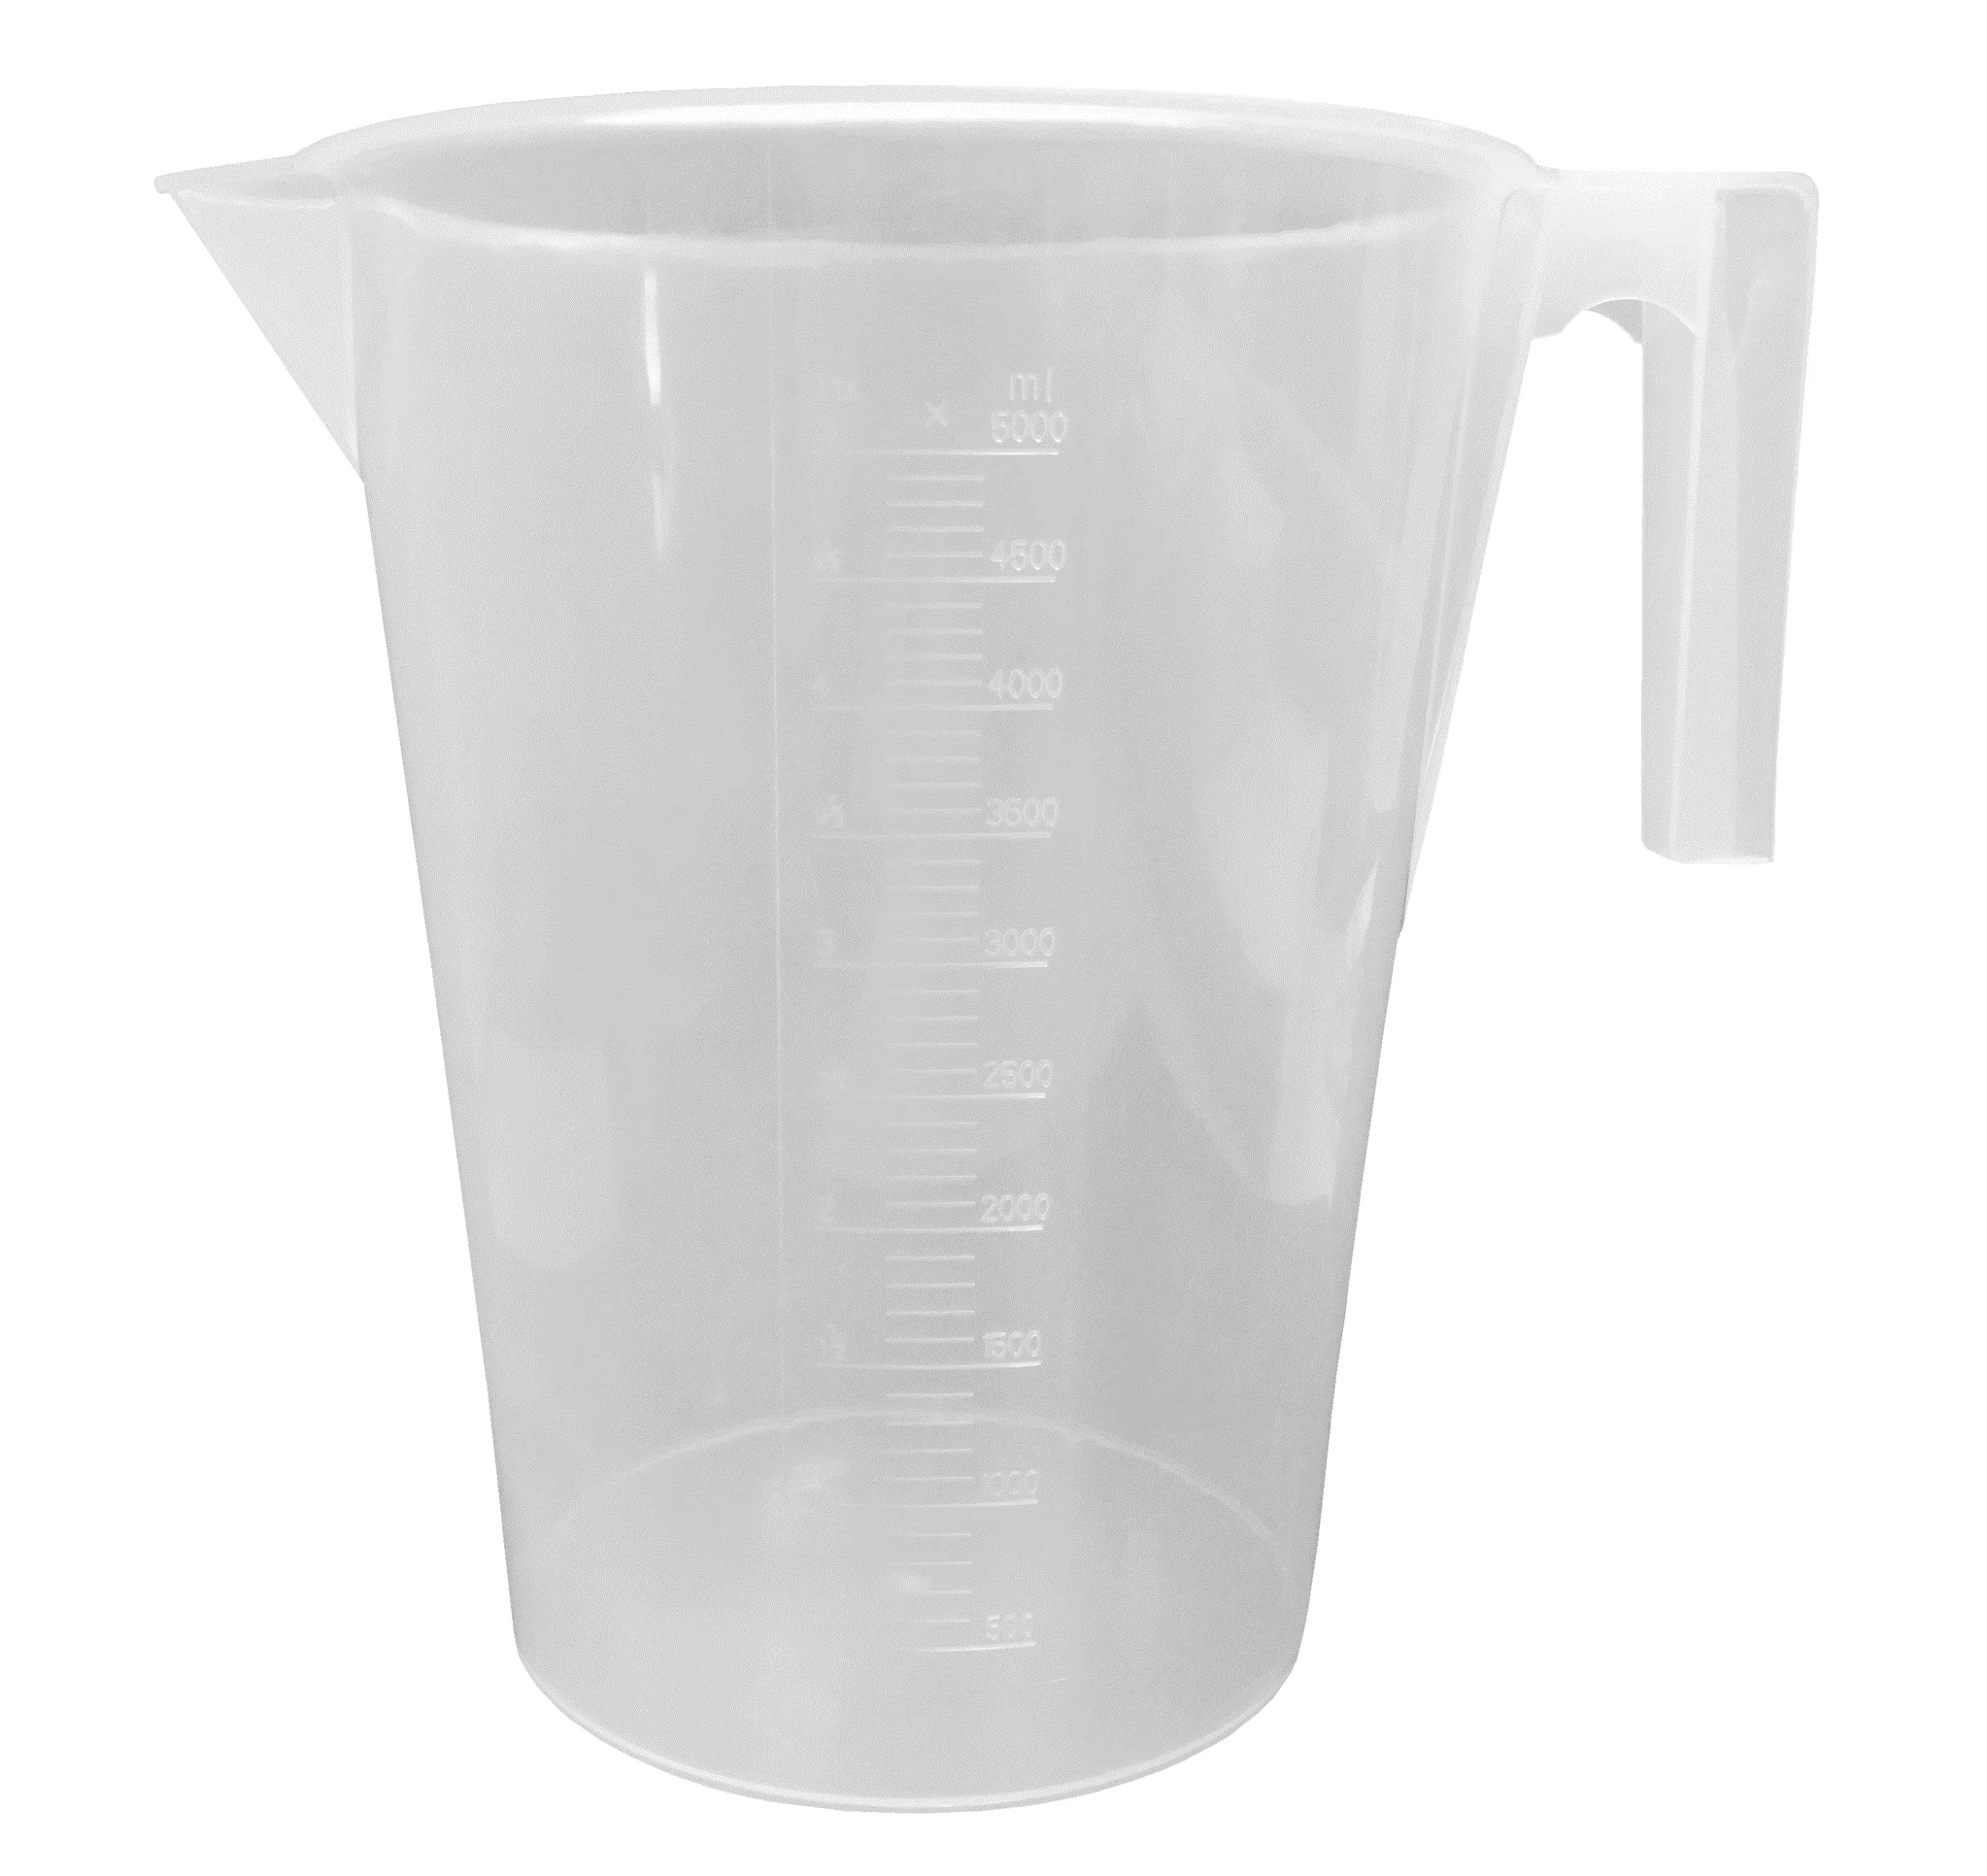 5000 ml Polypropylene Plastic Transparency Measuring Jug Container  with Graduated Digital Scale